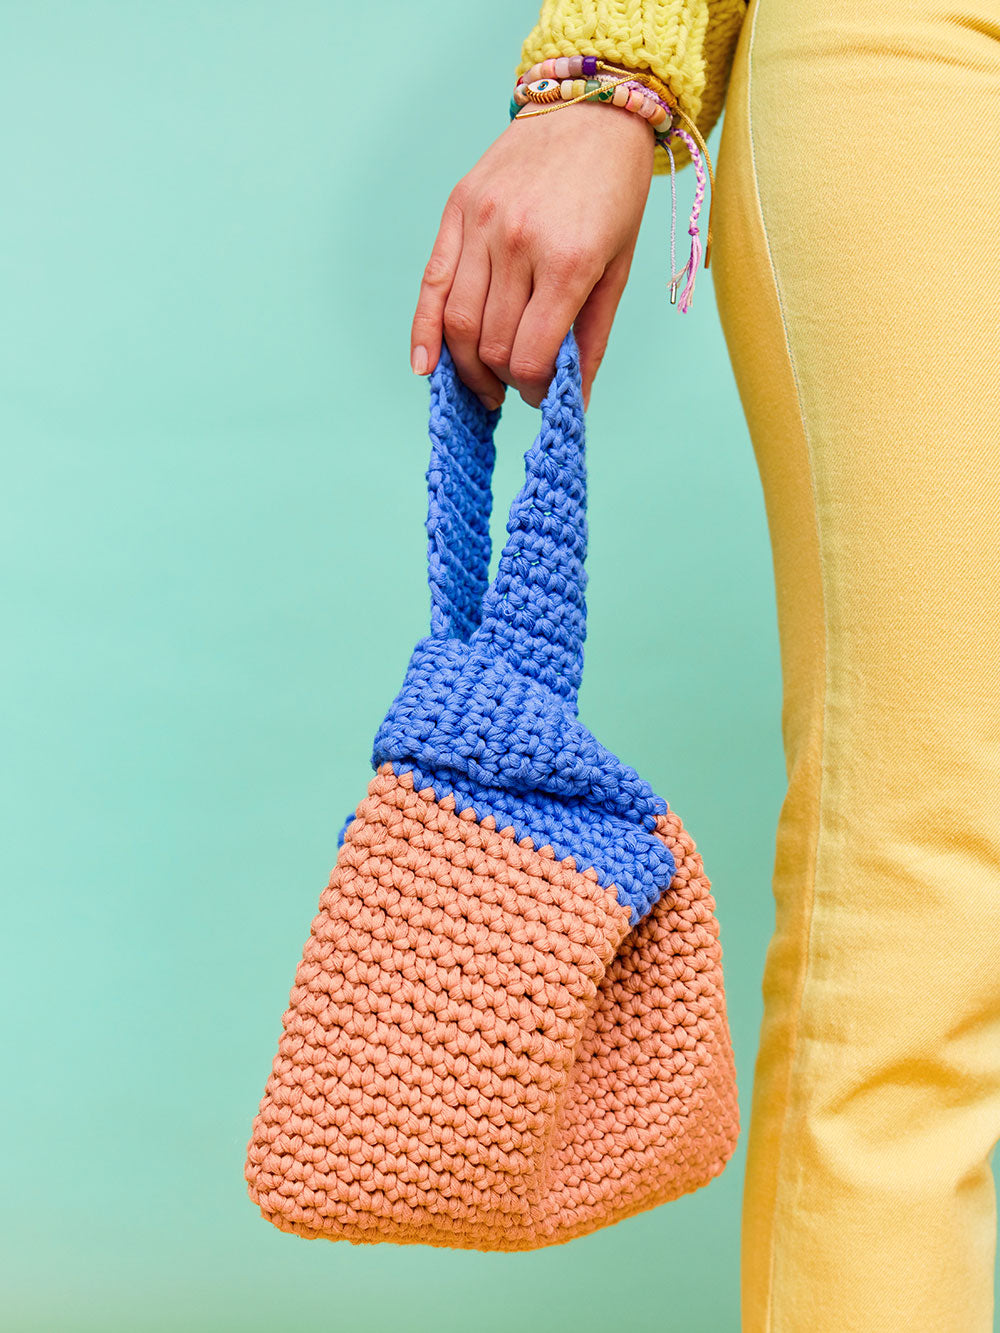 Learn to Crochet the Olive Knot Bag with Cardigang